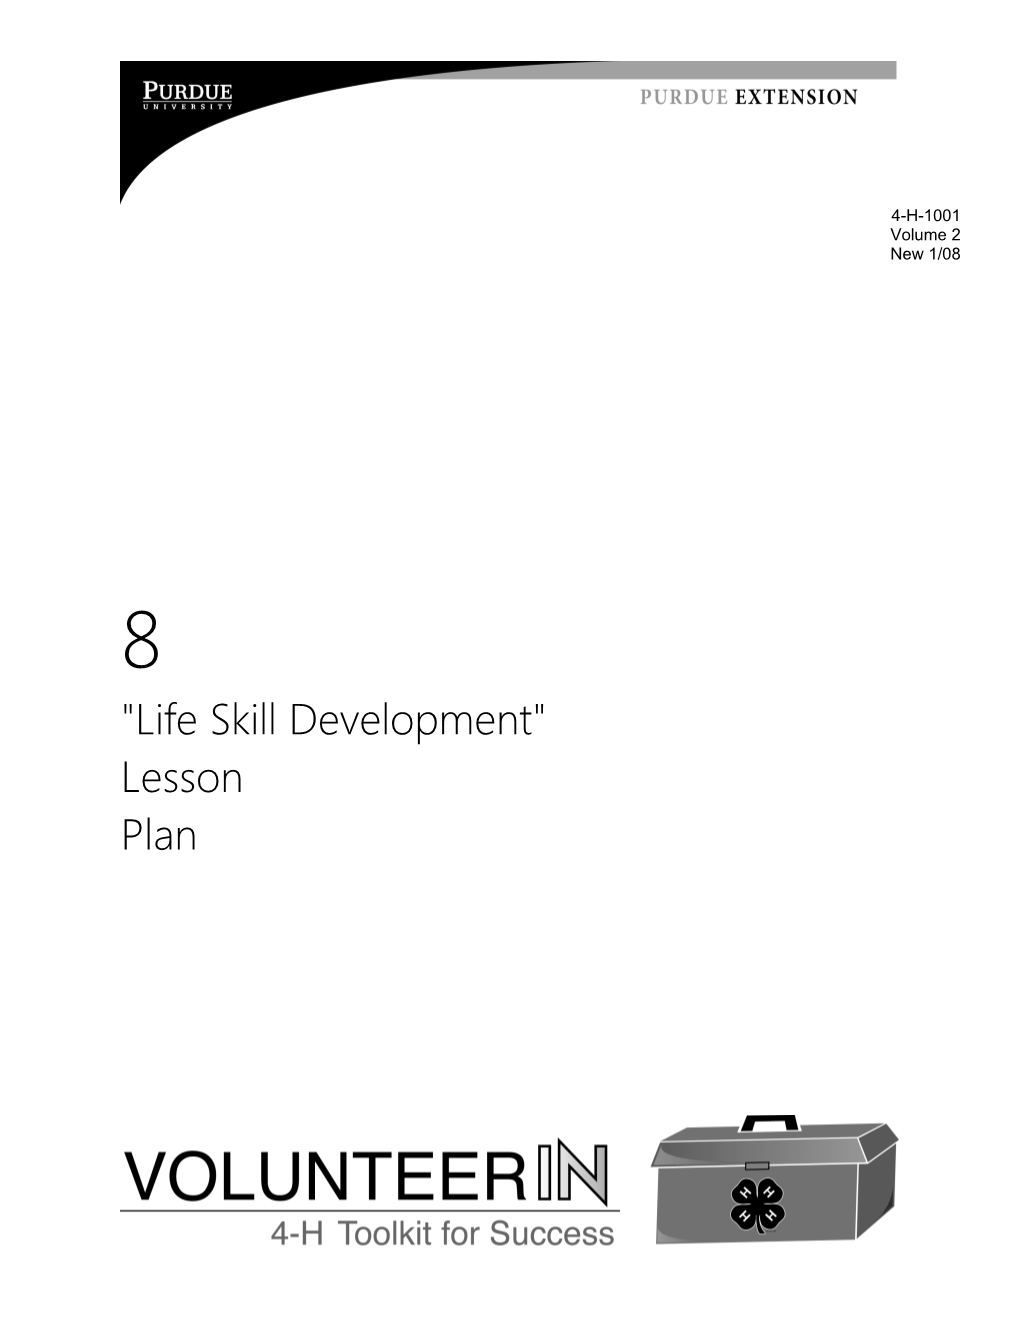 1. Identify Life Skills Developed by 4-H Members